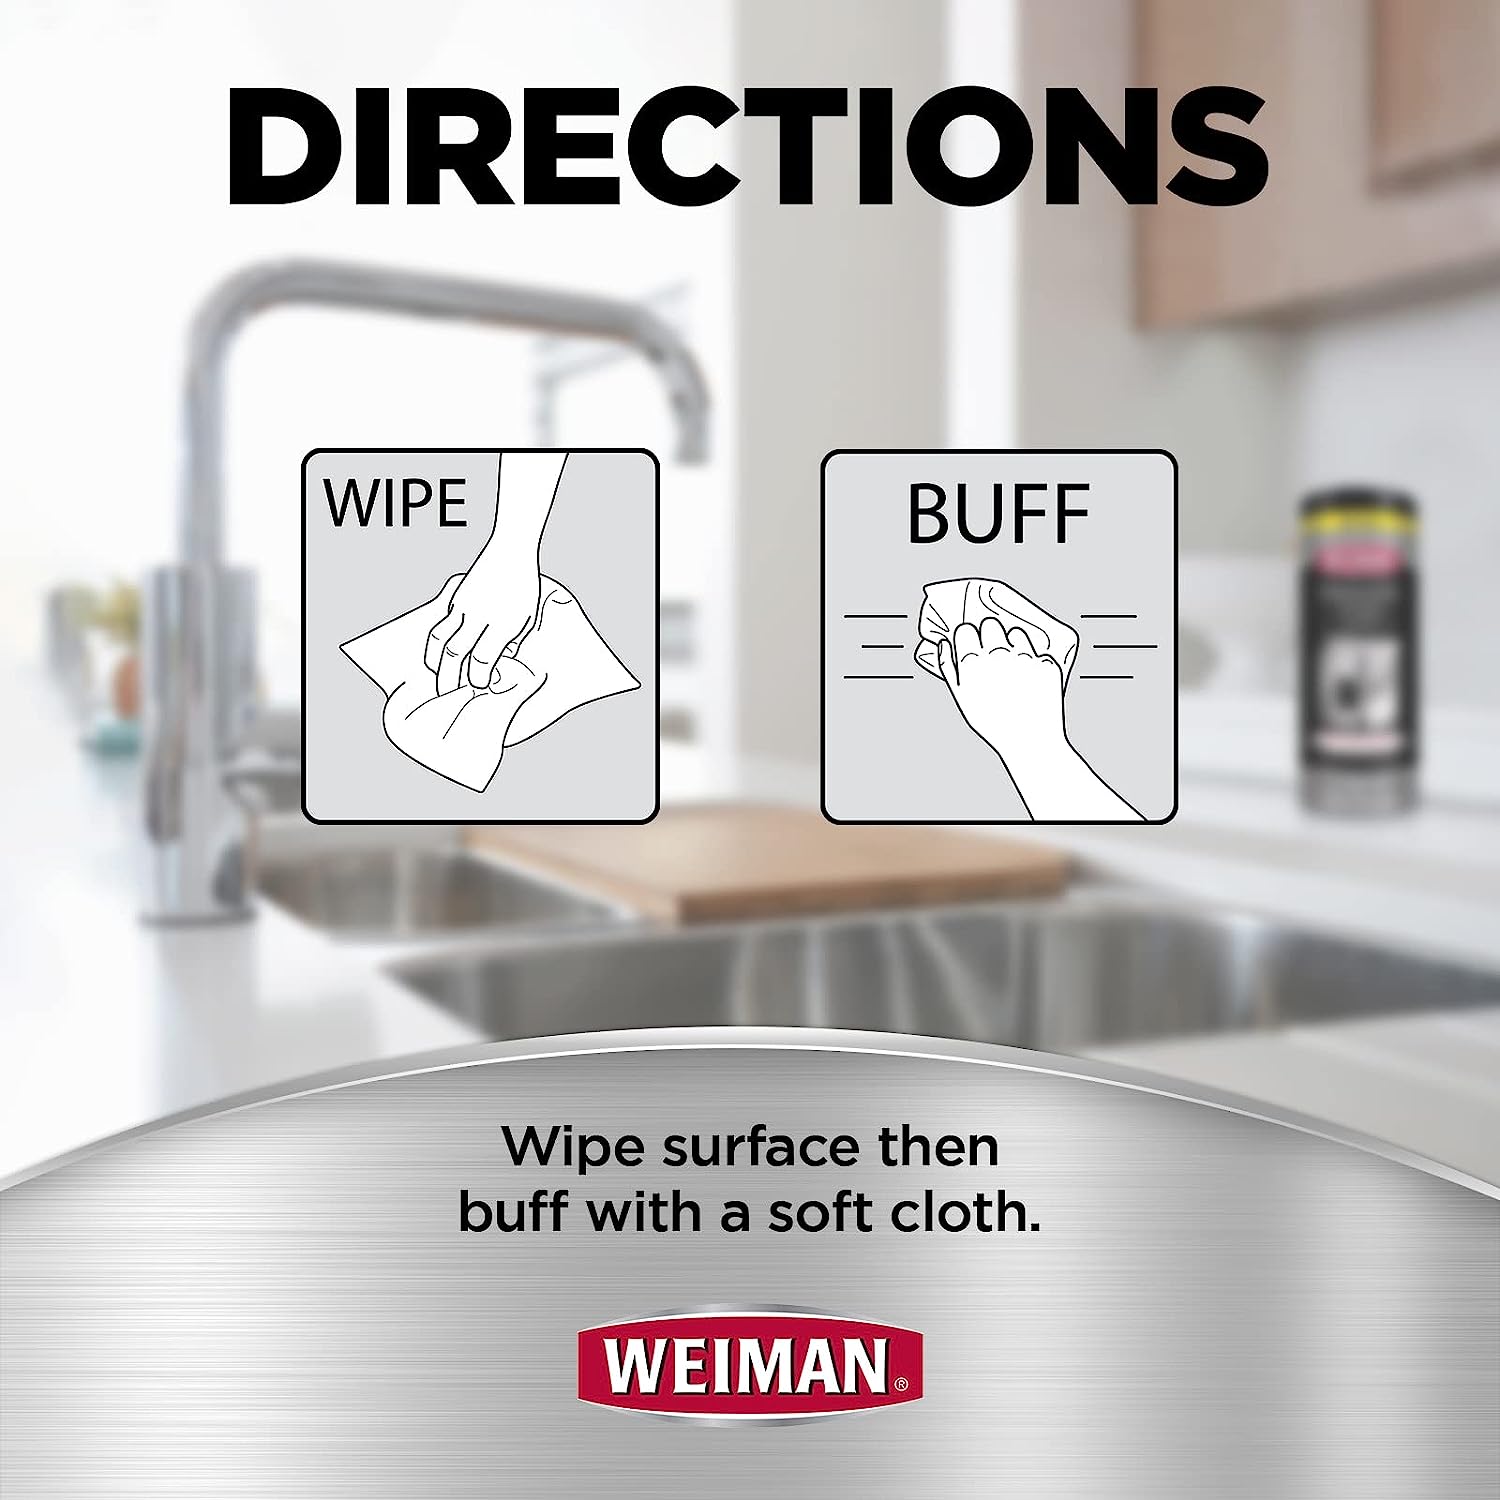 Weiman Stainless Steel Cleaner and Polish Wipes Bundle with Microfiber Cloth-Removes Fingerprints, Water Marks and Grease from Appliances - Works Great on Refrigerators, Ovens, and Grills : Health & Household